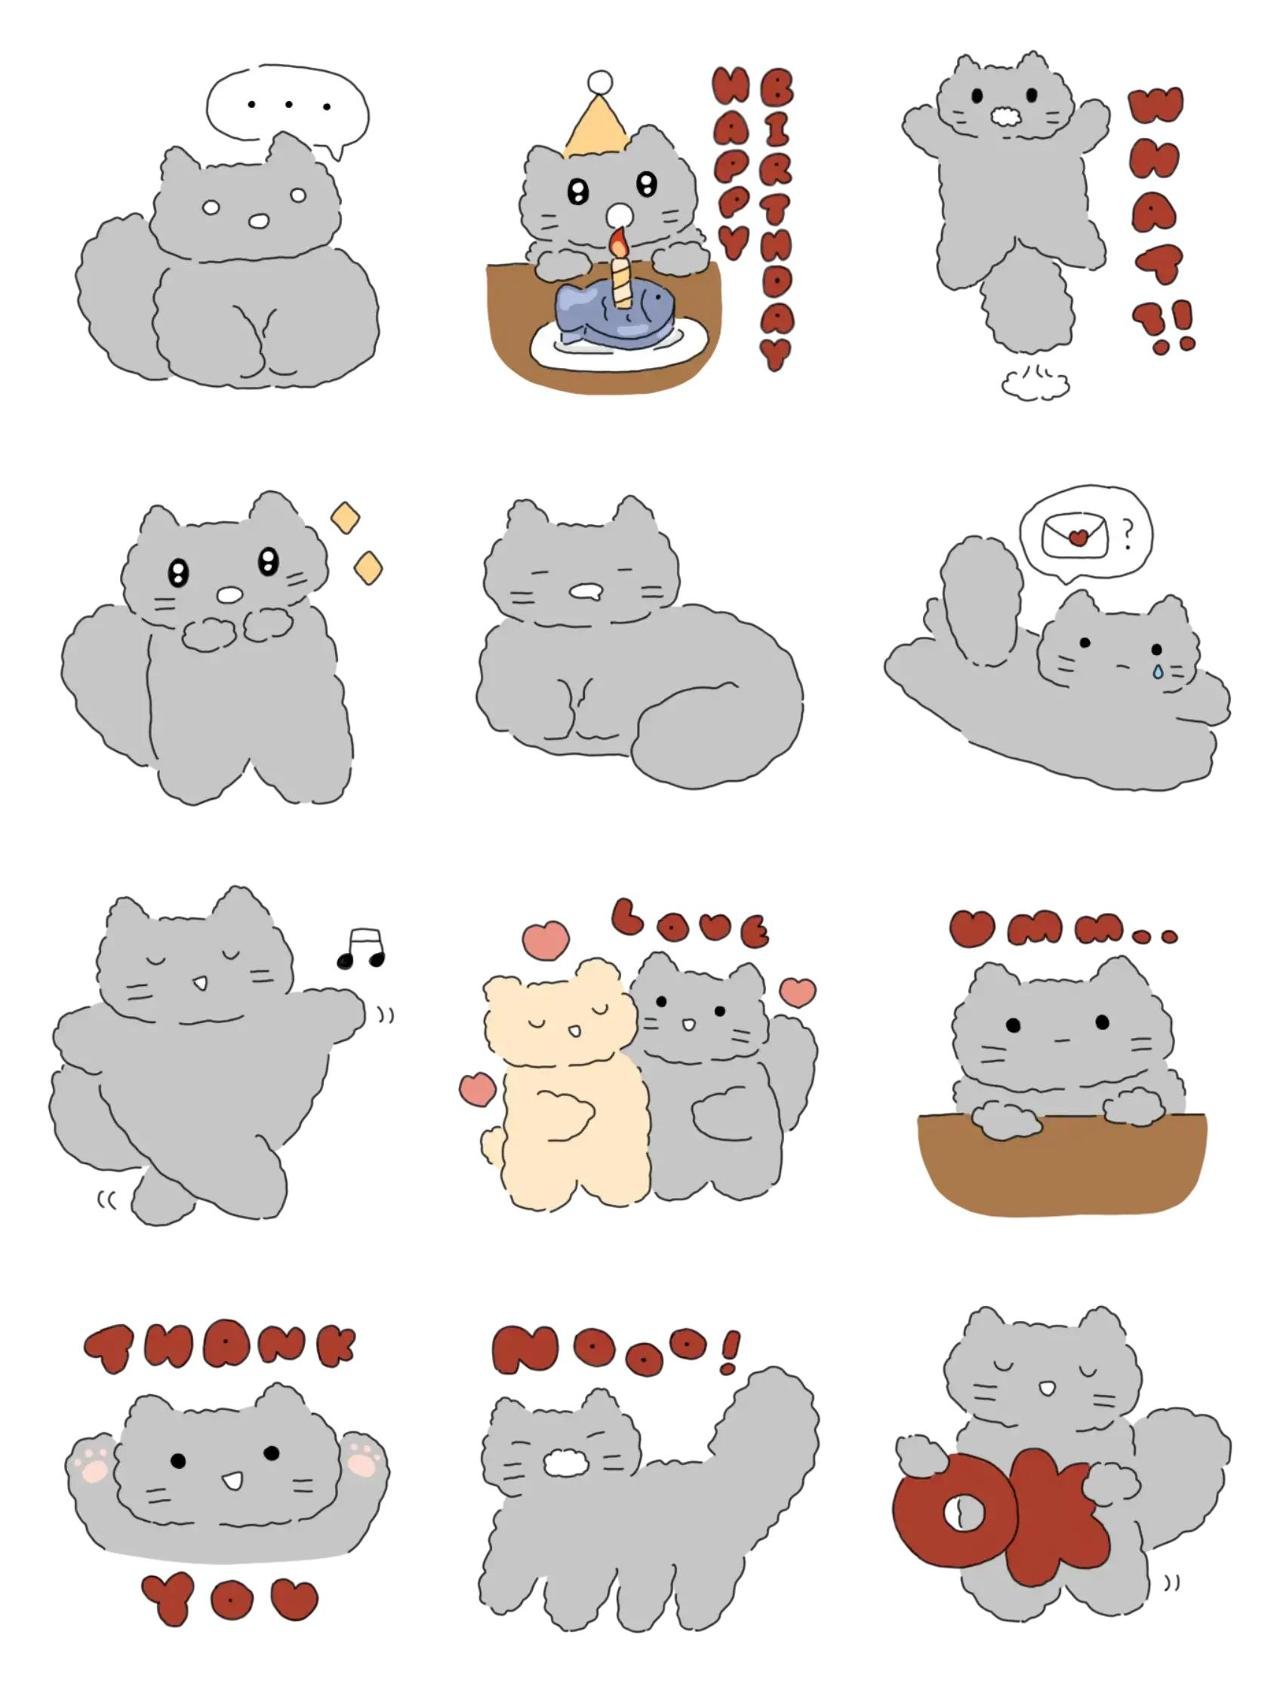 Grey cat Animation/Cartoon,Animals sticker pack for Whatsapp, Telegram, Signal, and others chatting and message apps